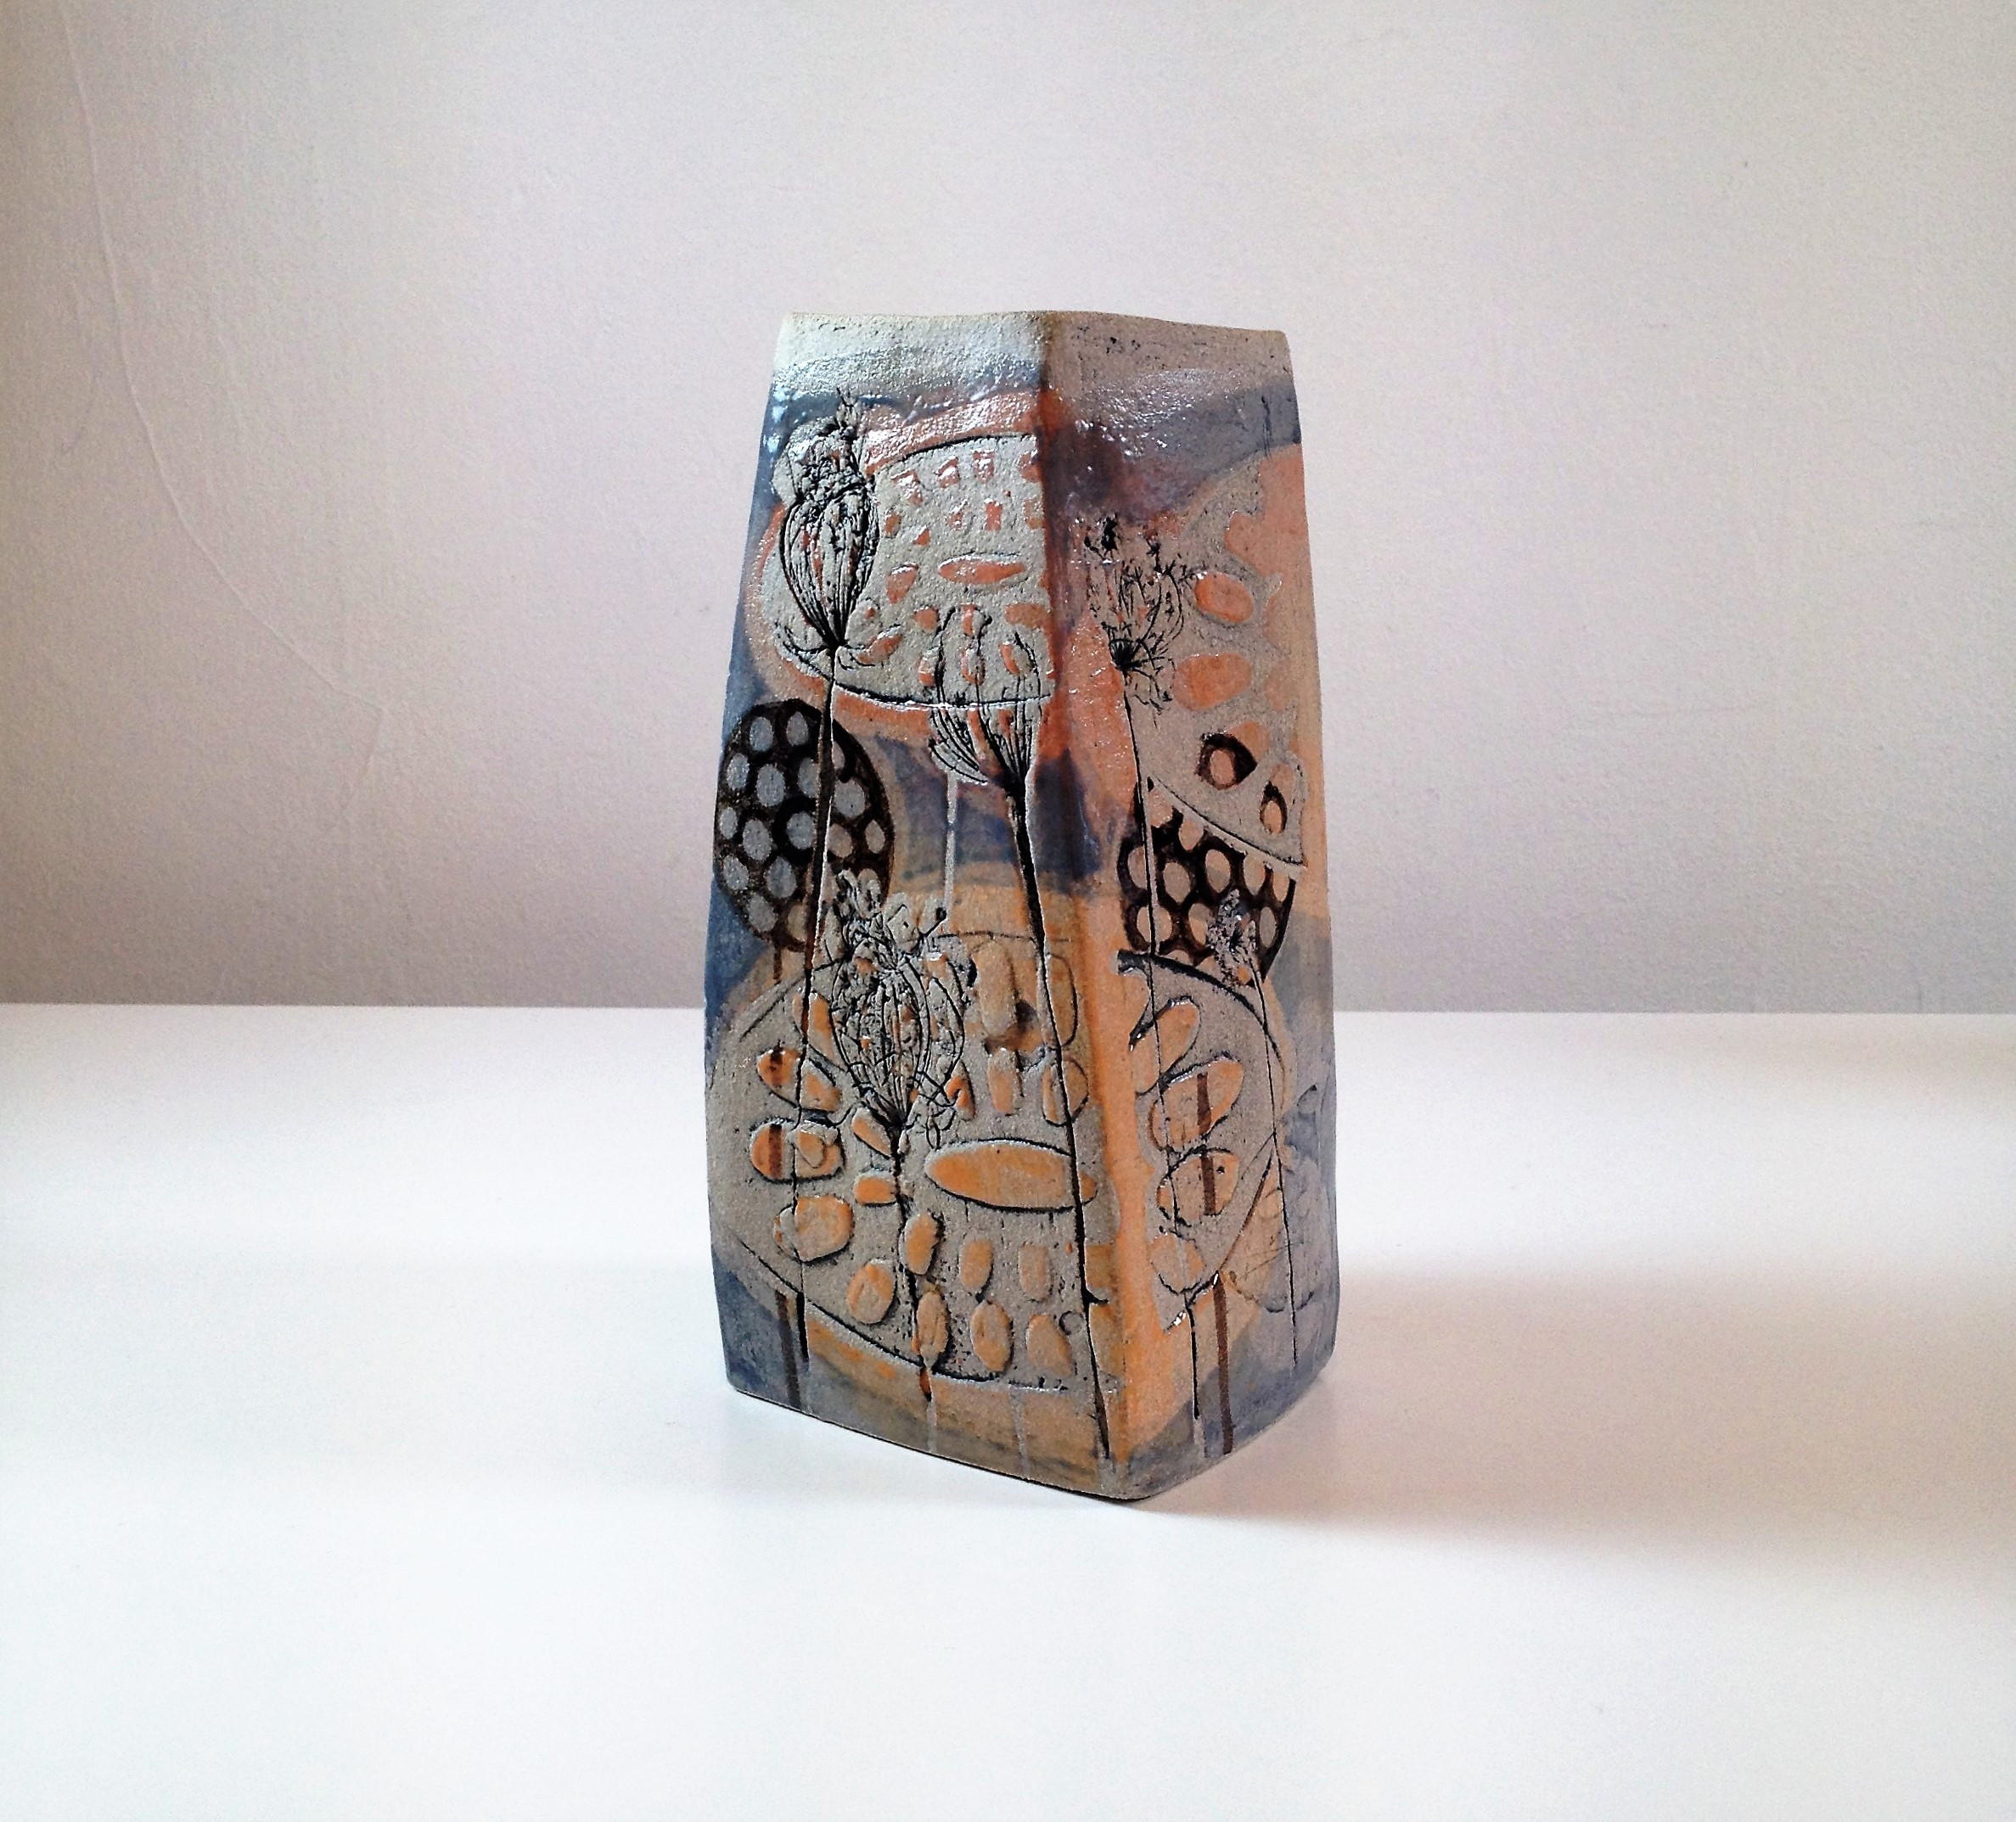 19 attractive Small Wood Vase 2024 free download small wood vase of small square vase sarah wiseman gallery with small square vase